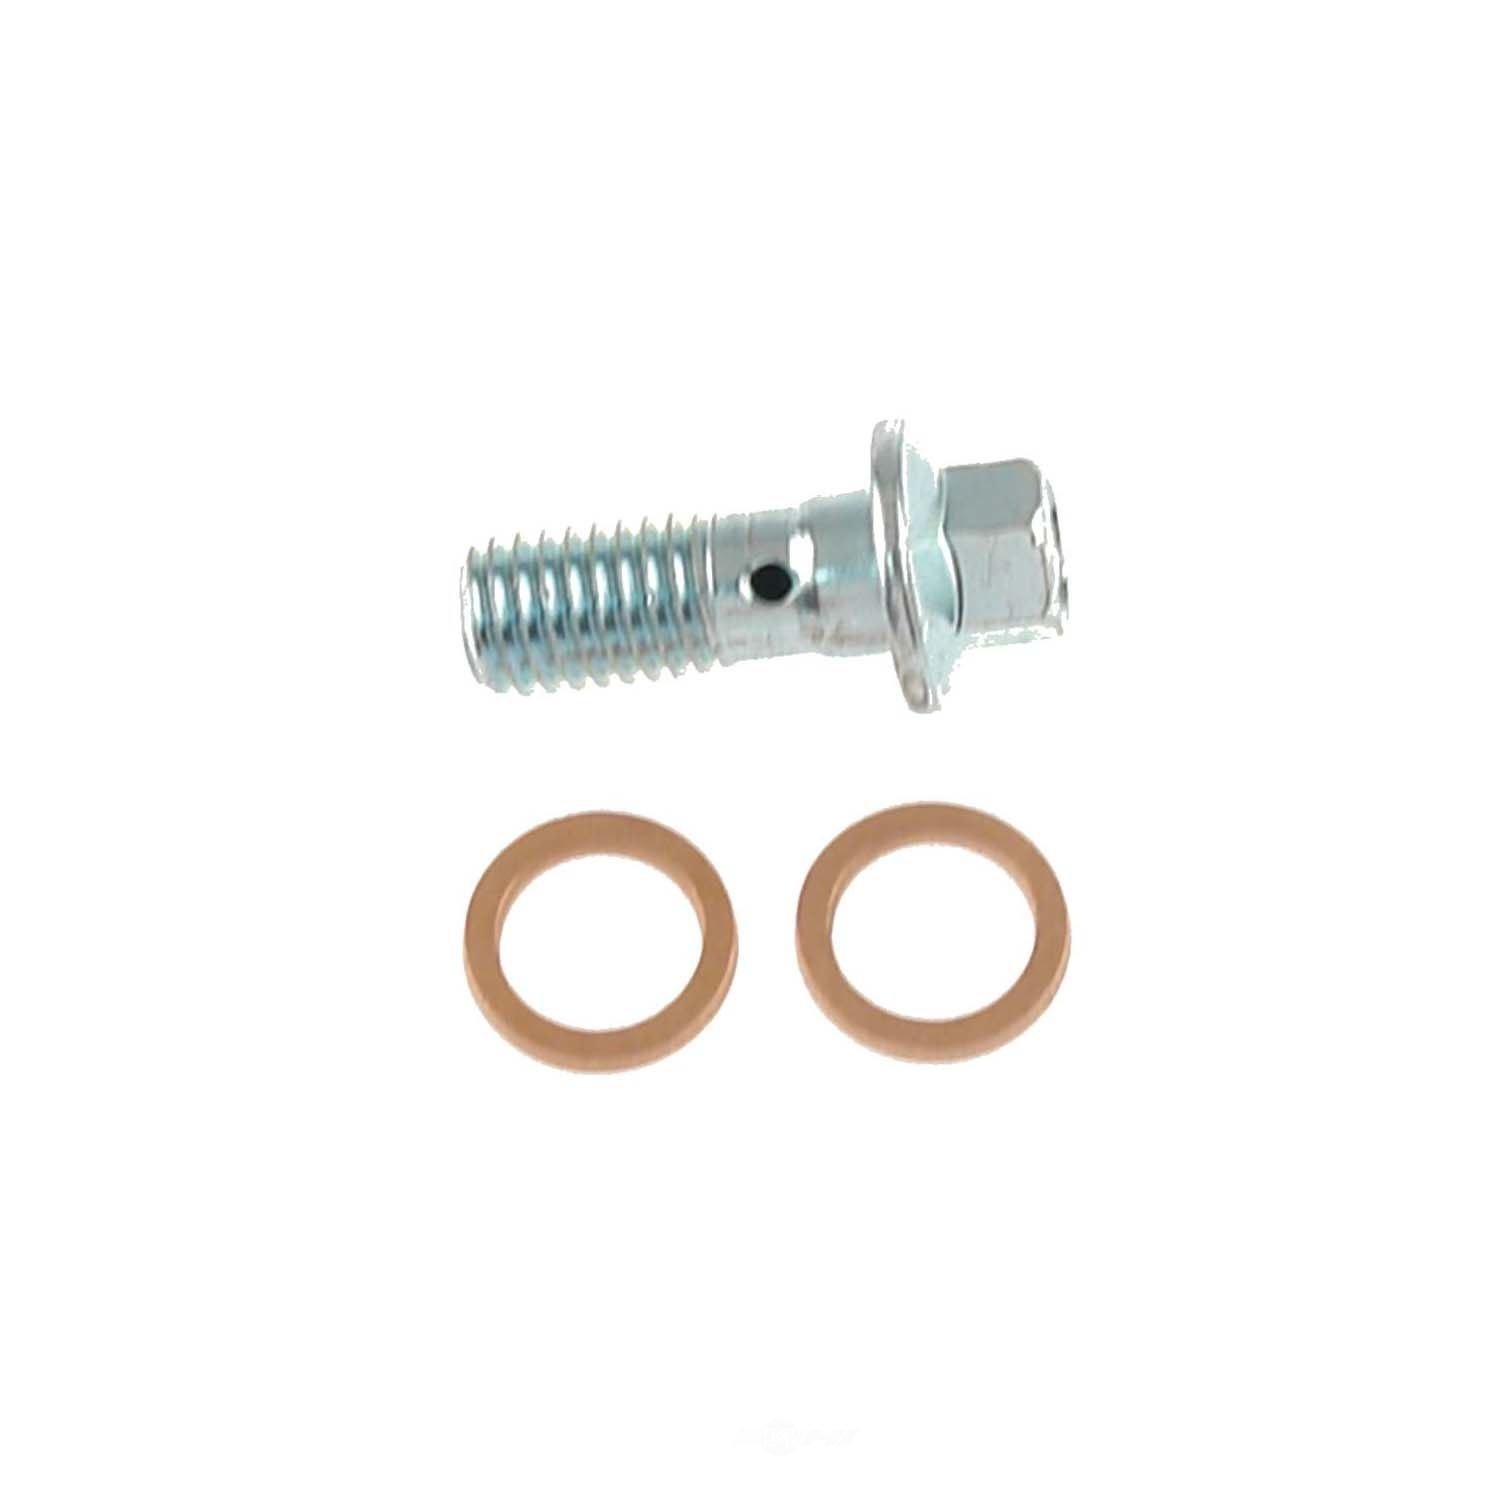 CARLSON QUALITY BRAKE PARTS - Contains 1 Bolt and 2 Washers - CRL H9469-2